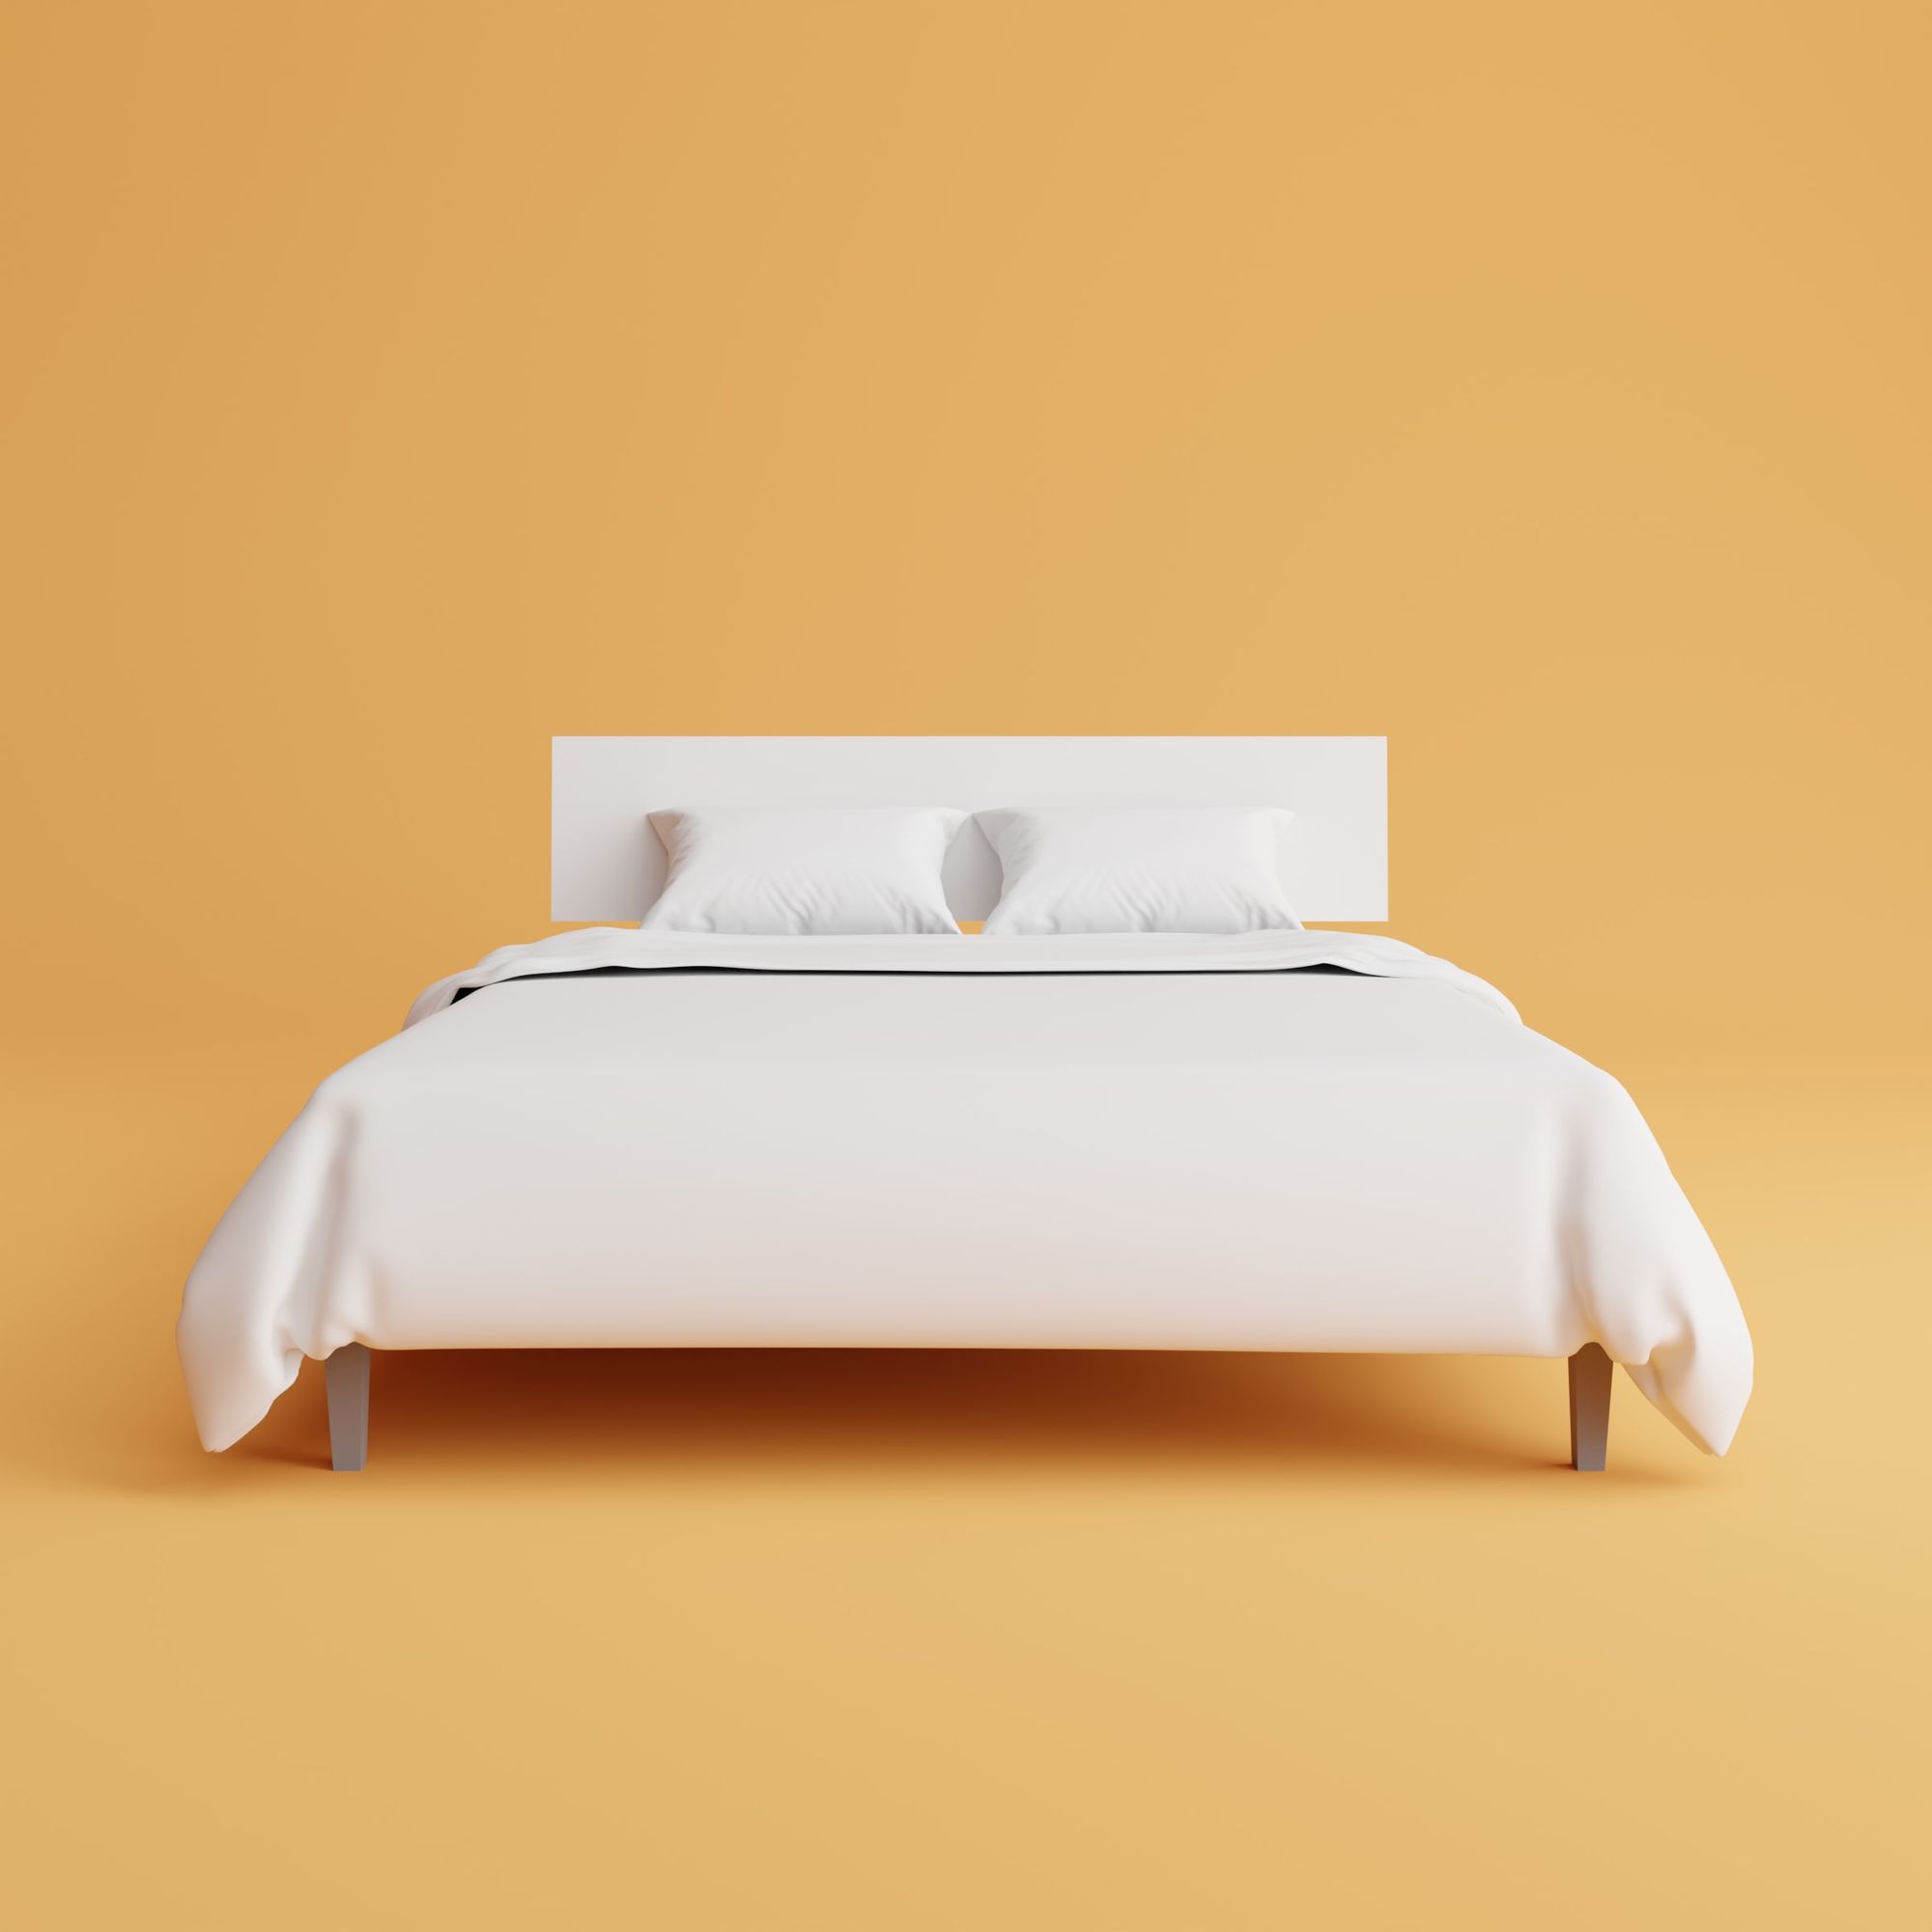 Long Weekend Mattress Sales on Lolli for Free Bitcoin Back!